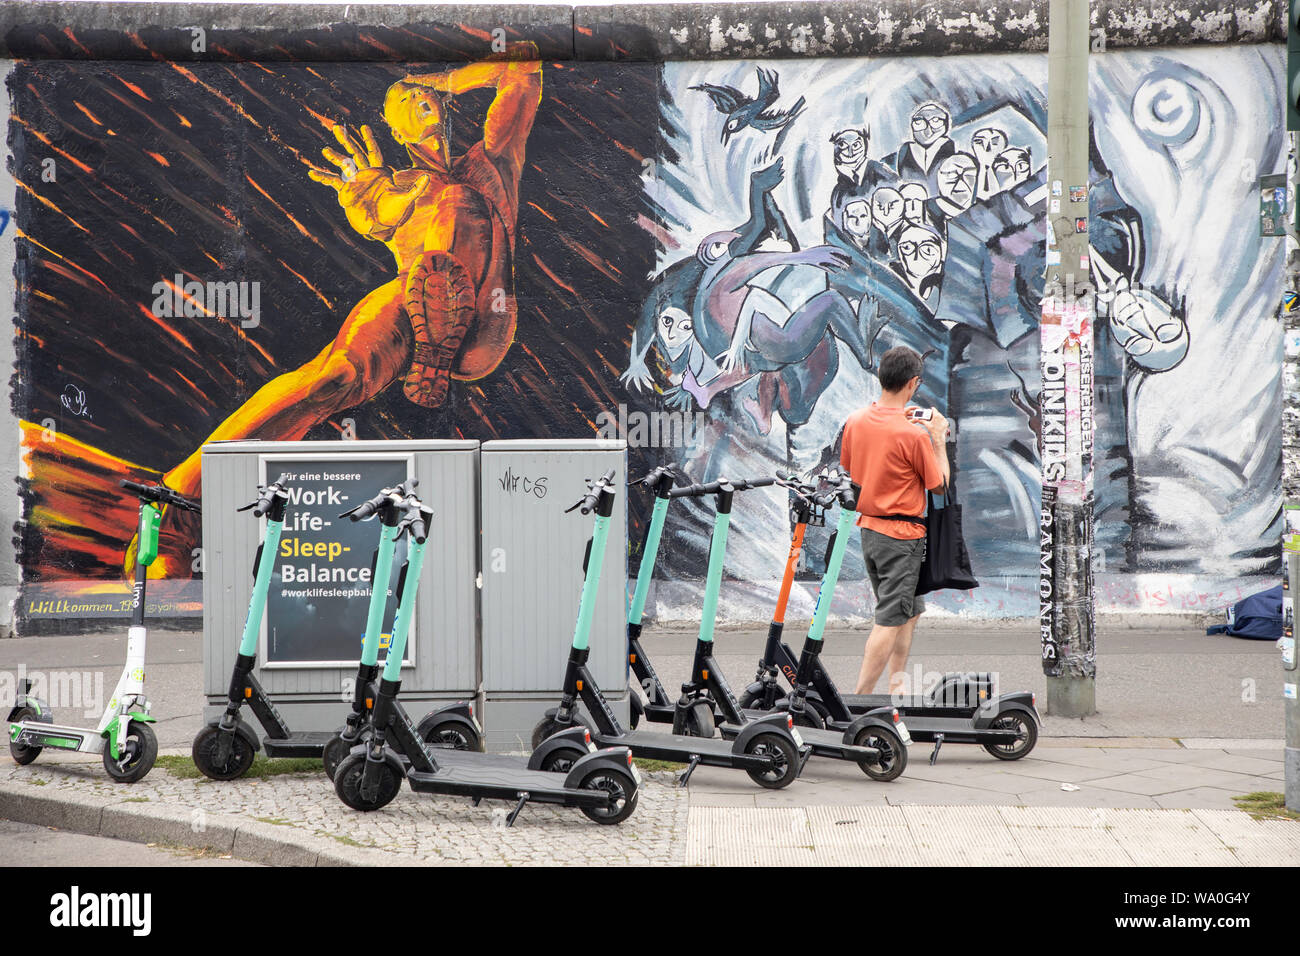 Eastside Galery, e-scooter, electric scooter, rental scooter, in Berlin, parking at the roadside, sidewalk, Stock Photo